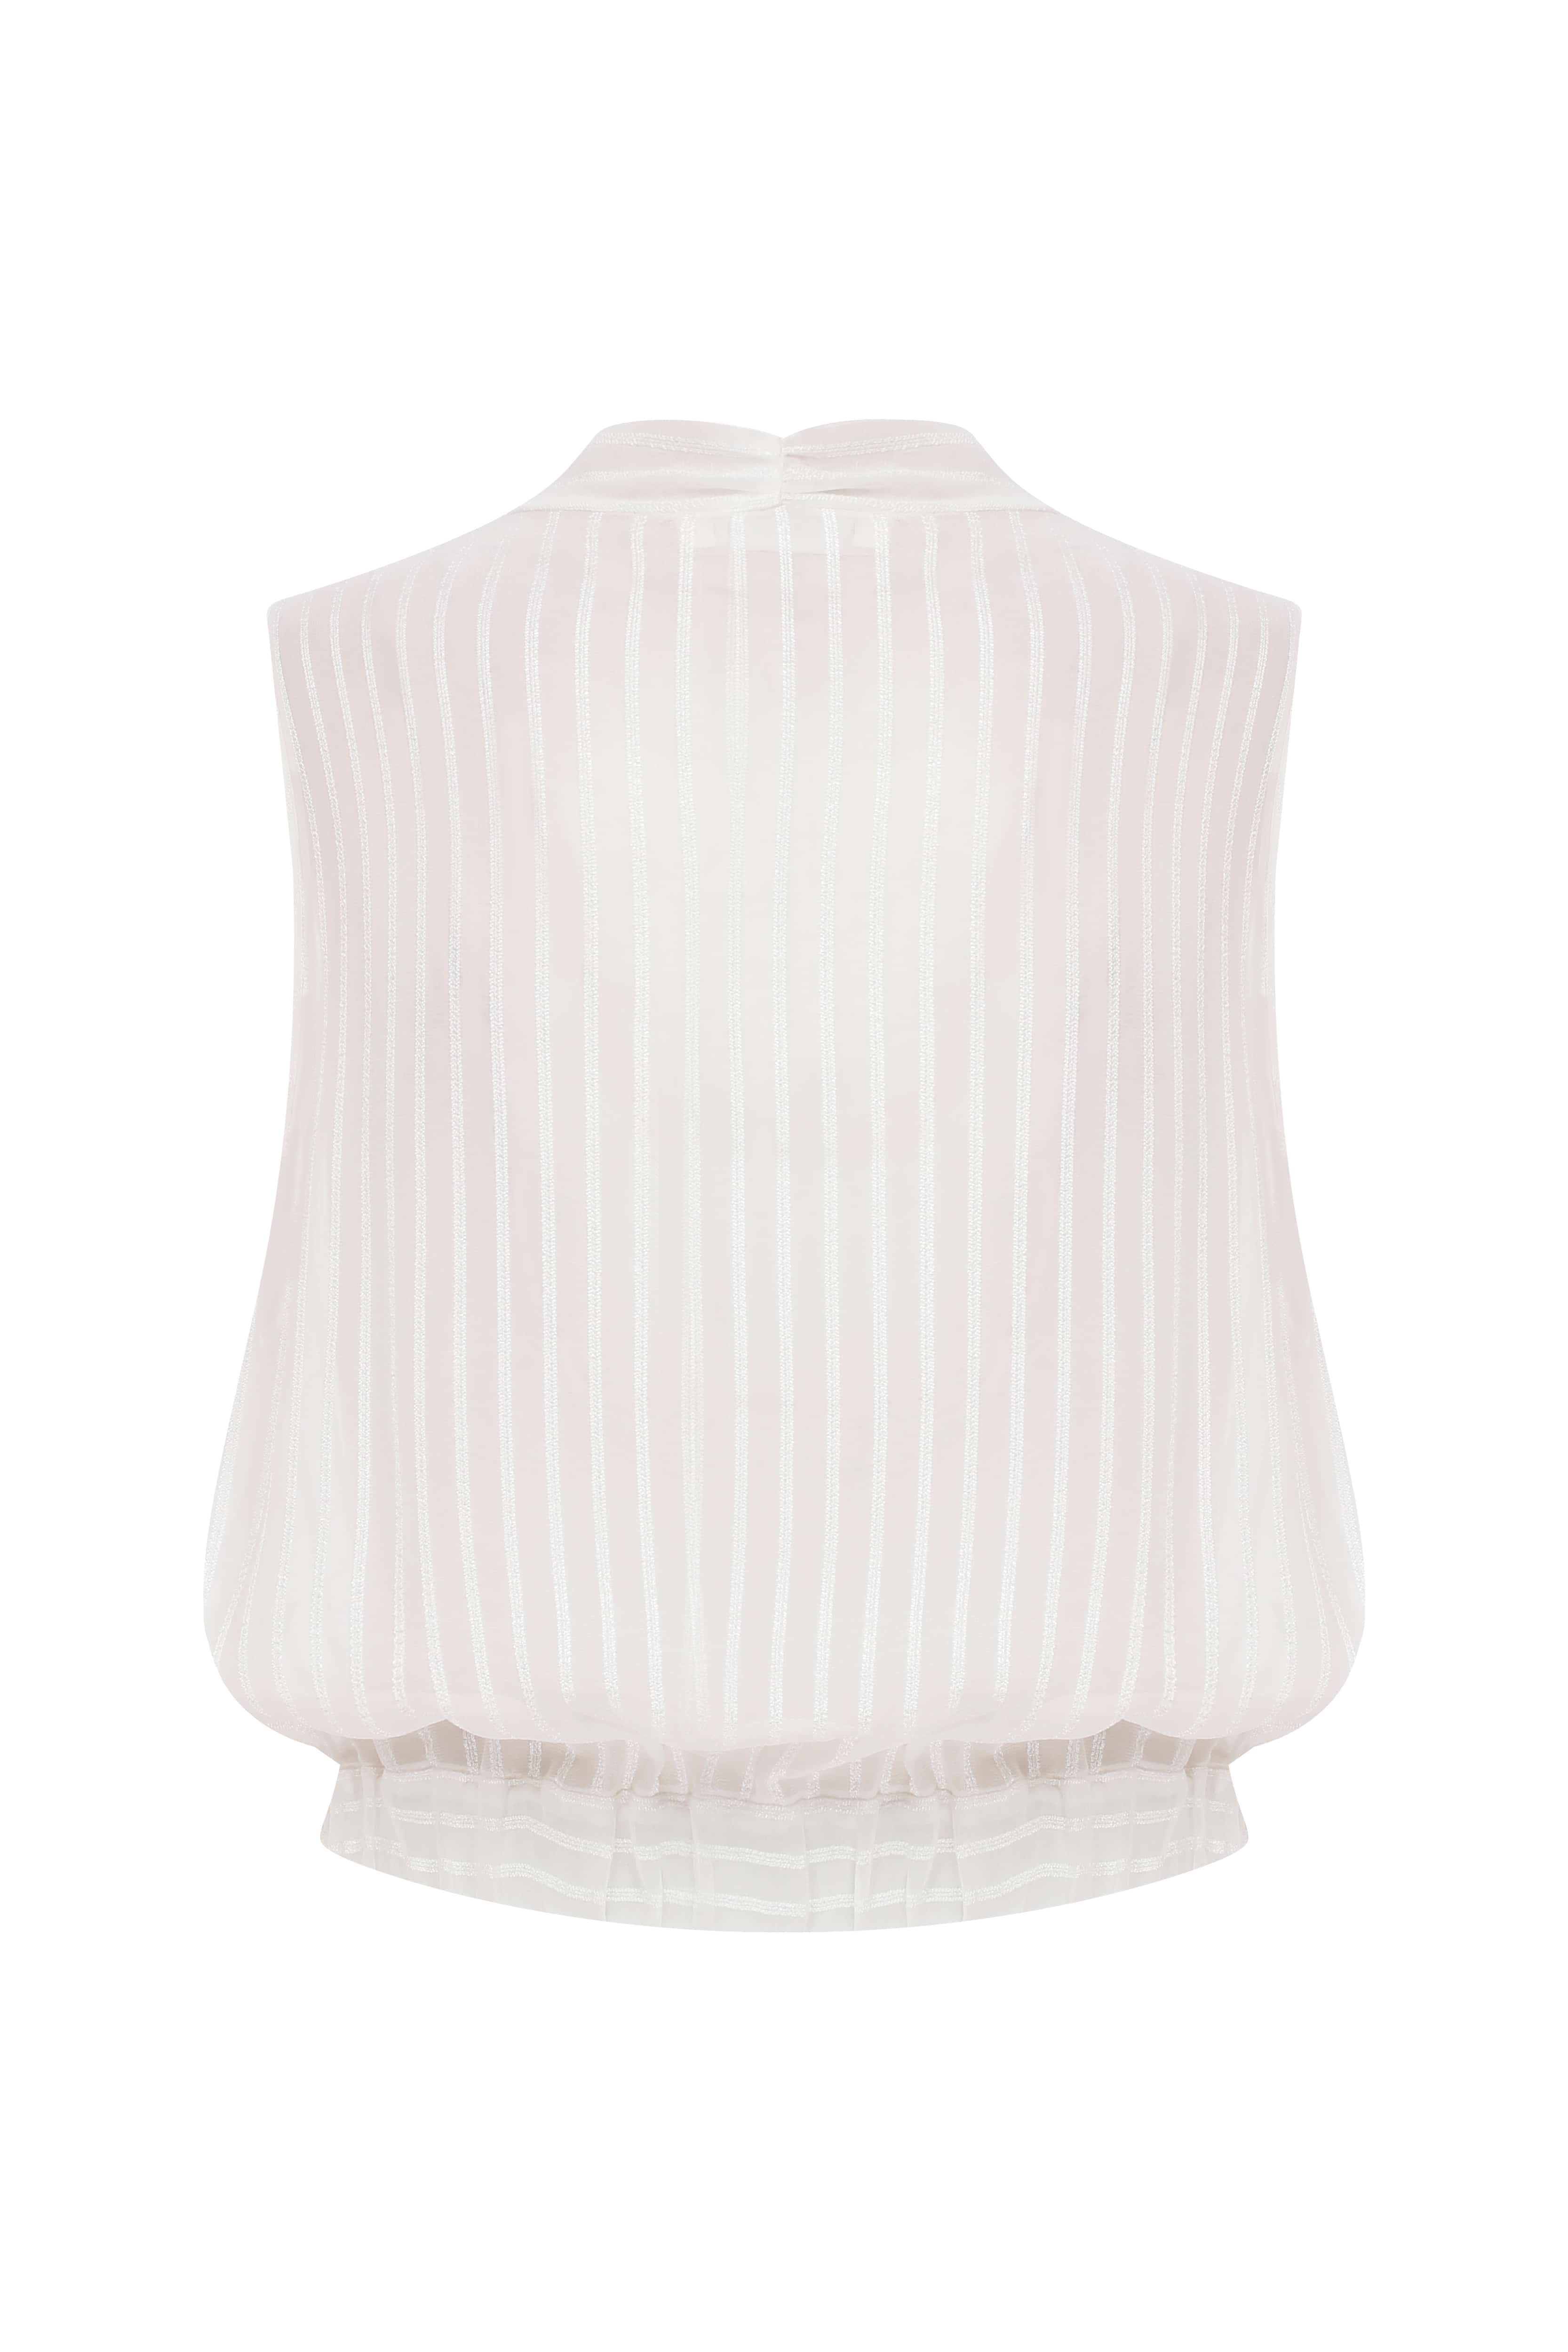 Sheer Striped Double Breasted White Blouse --[WHITE]